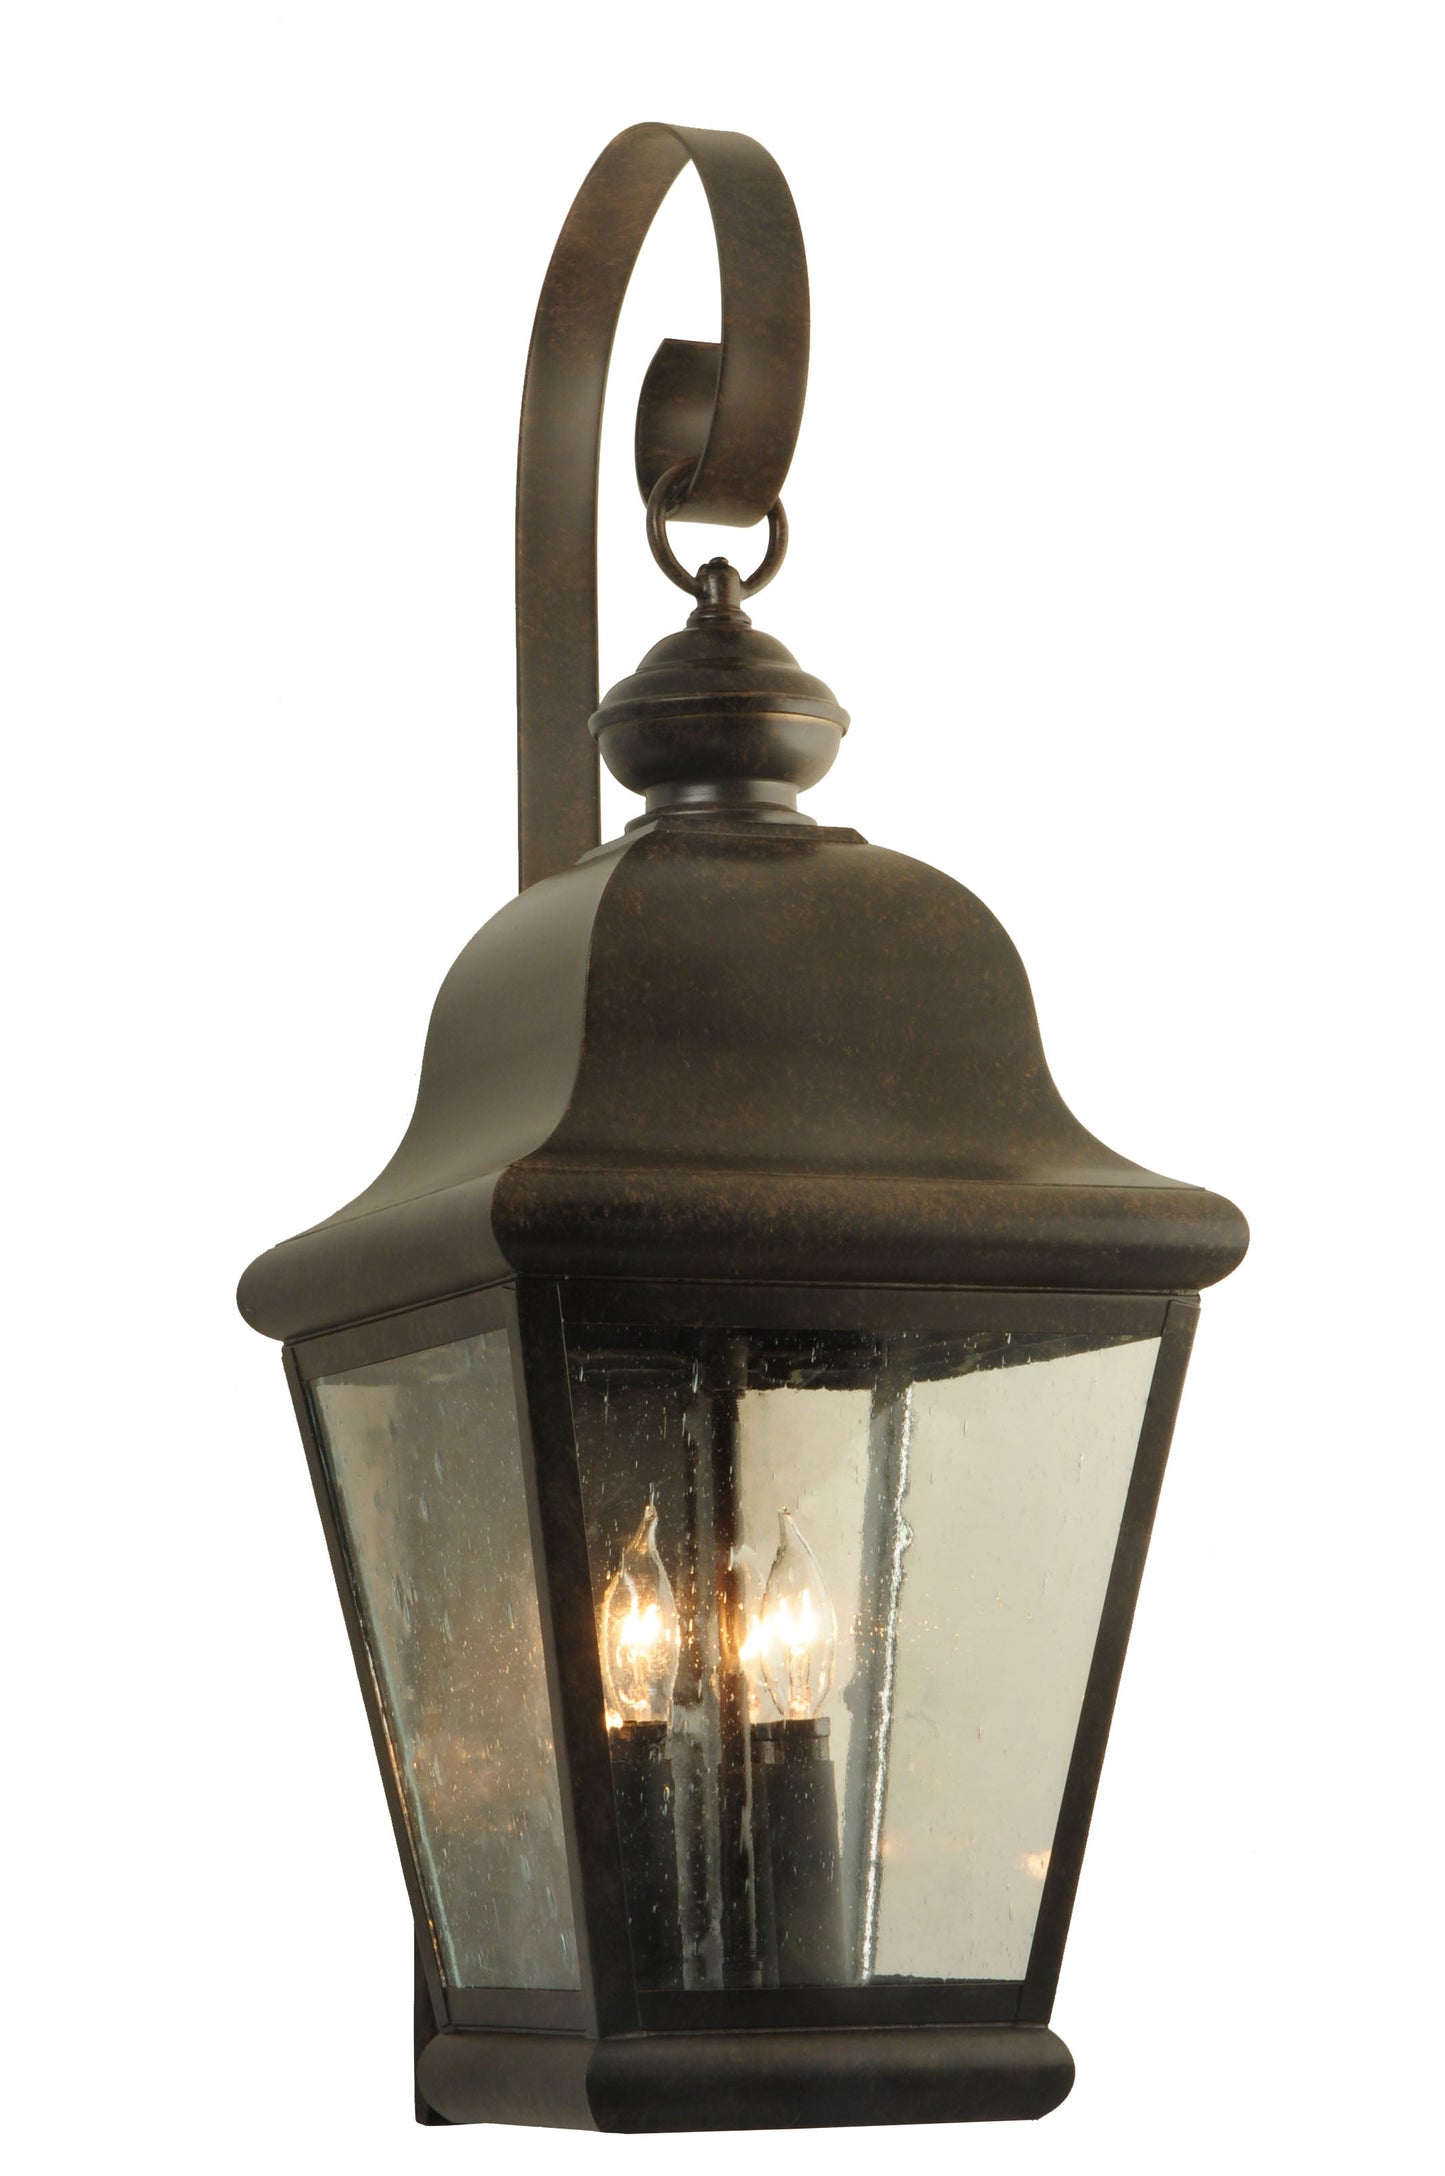 10.5" Lapalma Wall Sconce by 2nd Ave Lighting